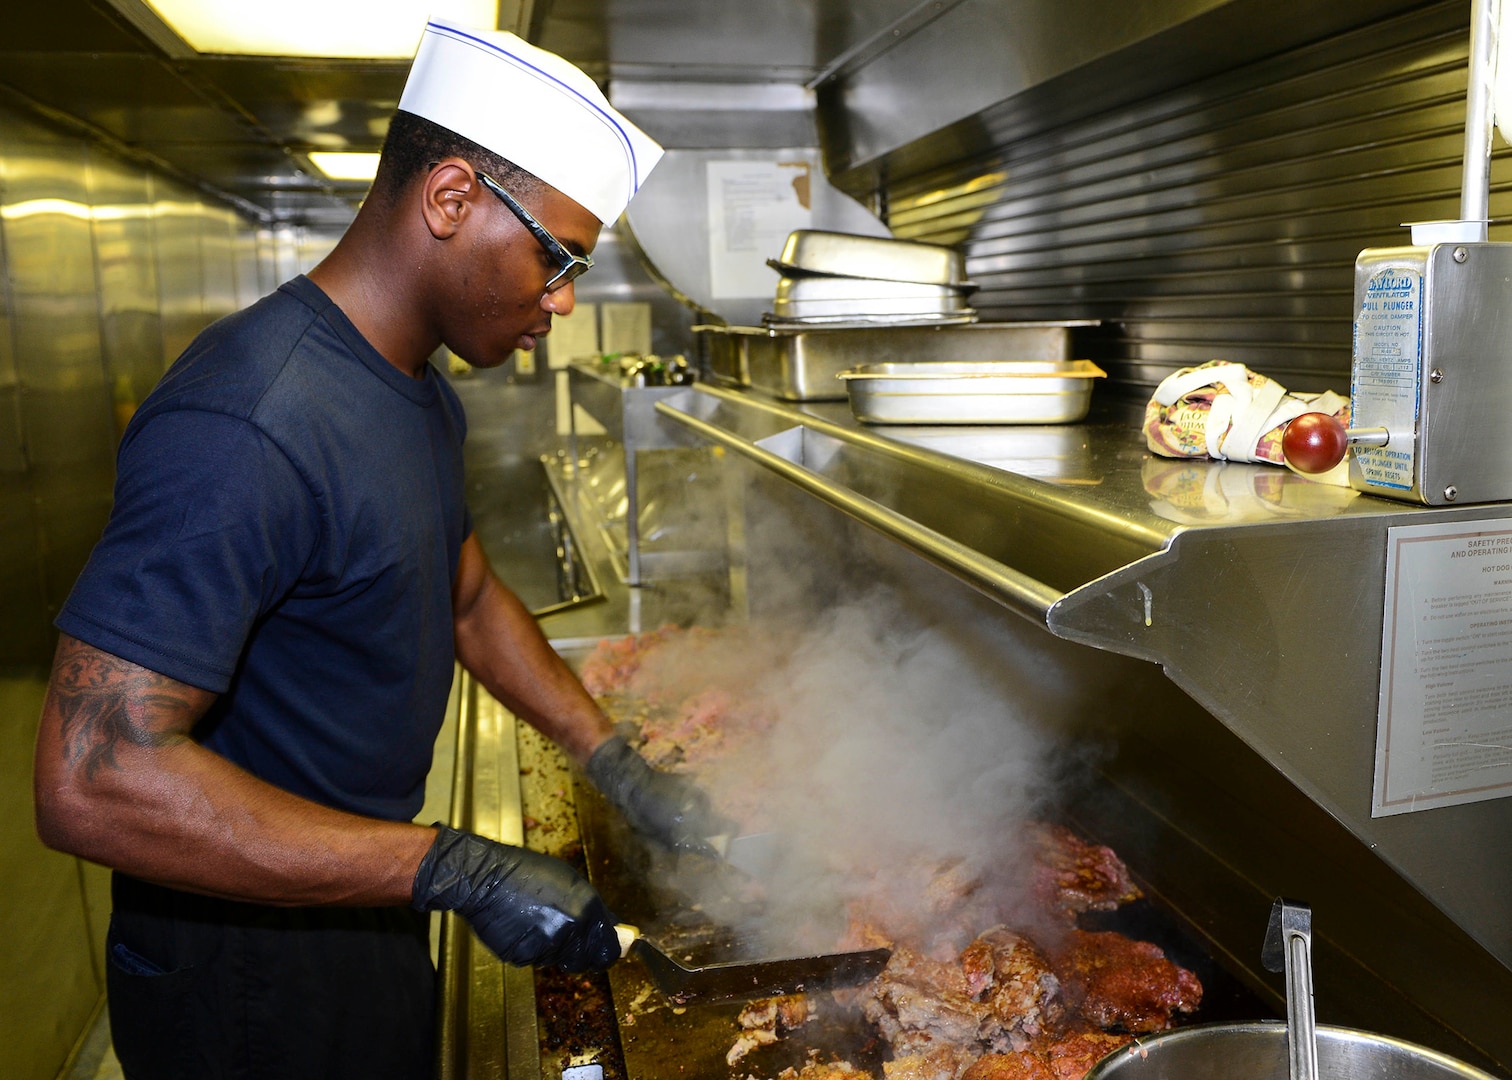 Navy Culinary Specialist 3rd Class Traivon Smart grills meat in the galley aboard the amphibious dock landing ship USS Whidbey Island (LSD 41) Aug. 9. DLA Troop Support's Subsistence supply chain hosted a pre-proposal conference Sept. 28 to help vendors preparing proposals for an upcoming beef national contract